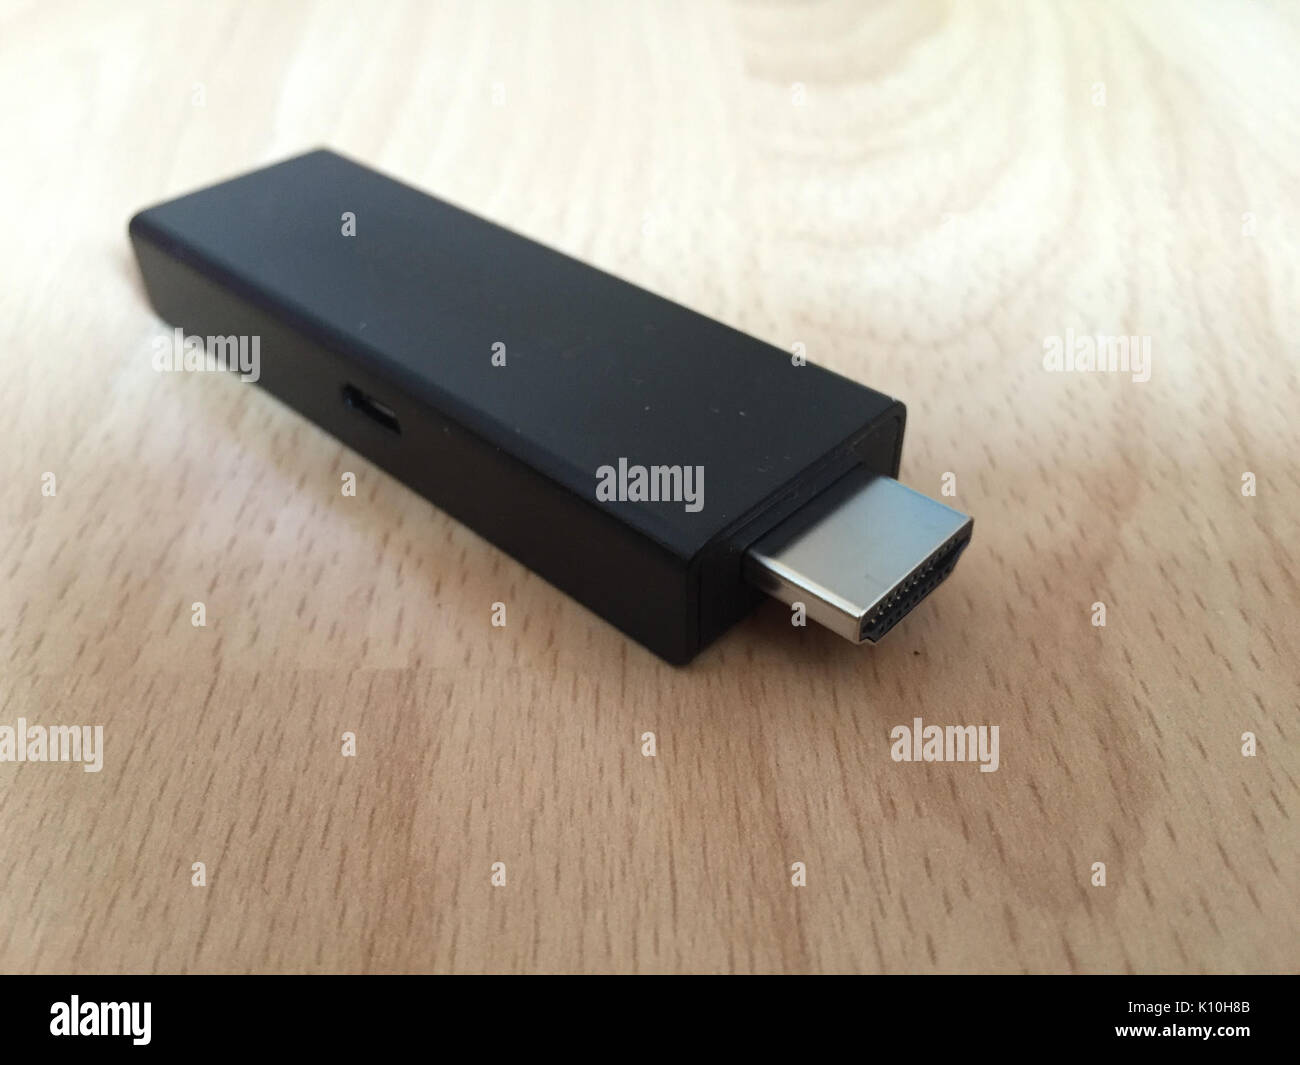 HUETTENBERG, GERMANY - FEBRUARY 03, 2020:  Fire TV stick.  Fire TV  Stick is a low cost version in a HDMI-stick format of  Fire TV, A  Stock Photo - Alamy